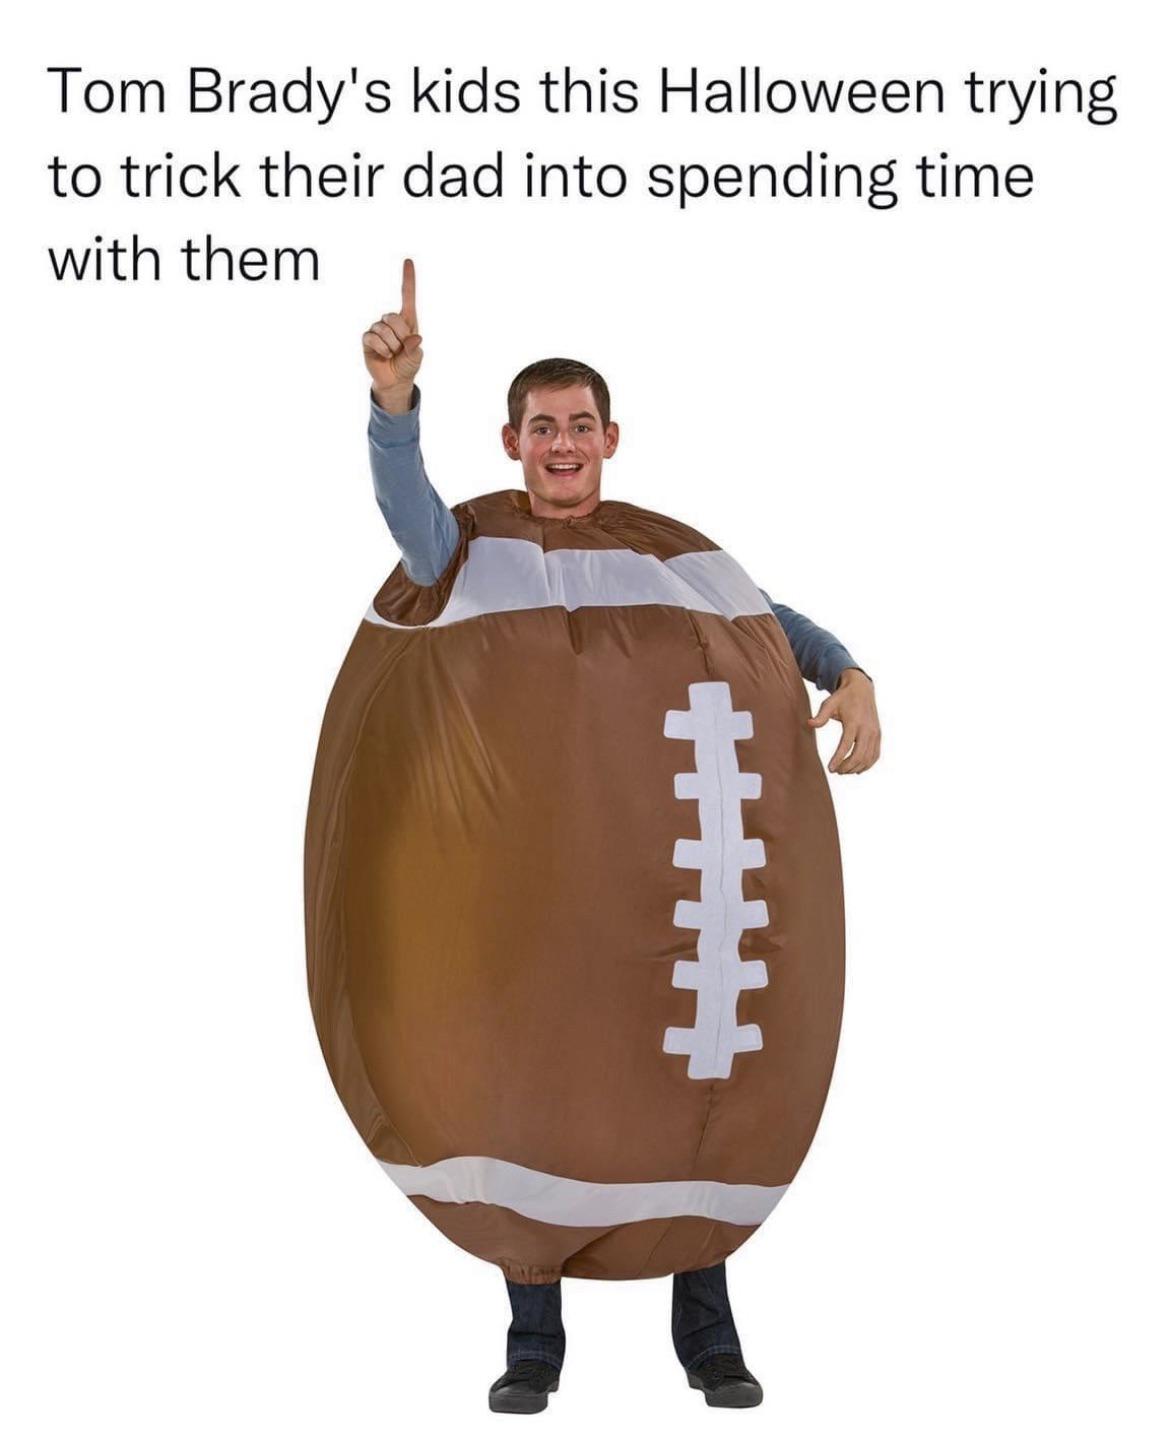 monday morning randomness - Tom Brady's kids this Halloween trying to trick their dad into spending time with them